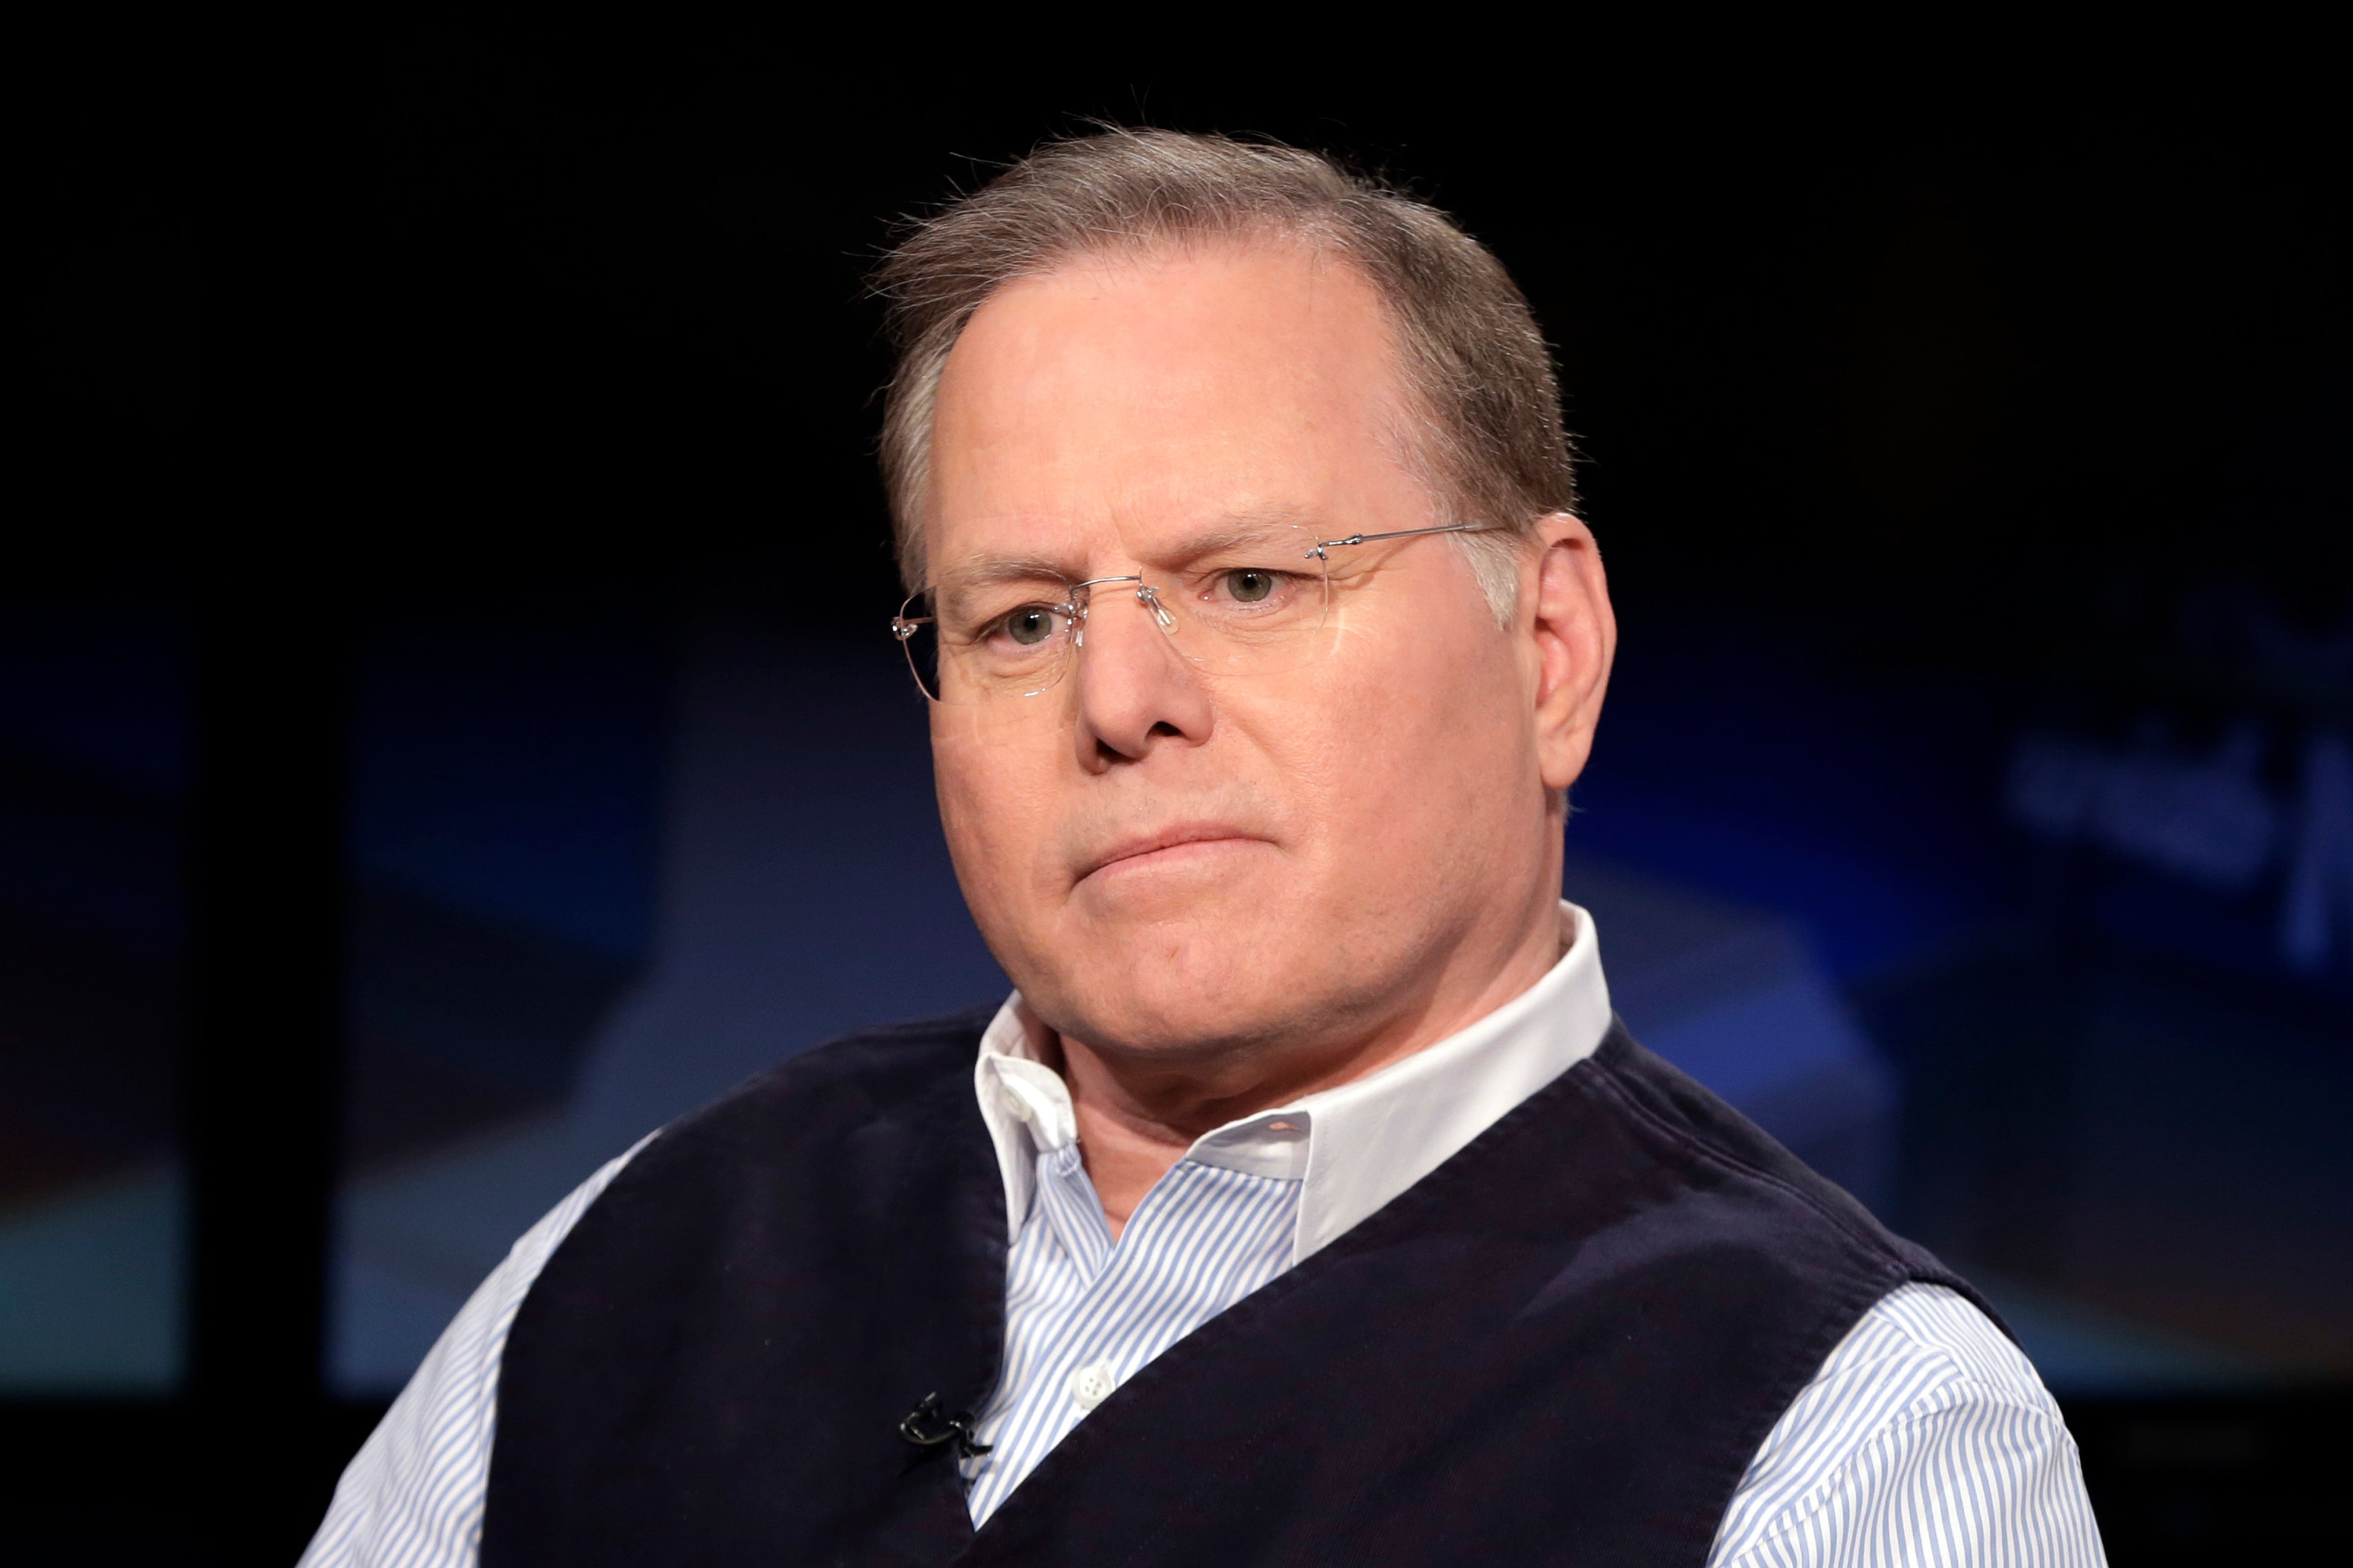 David Zaslav was the second highest-paid CEO for 2021, as calculated by The Associated Press and Equilar